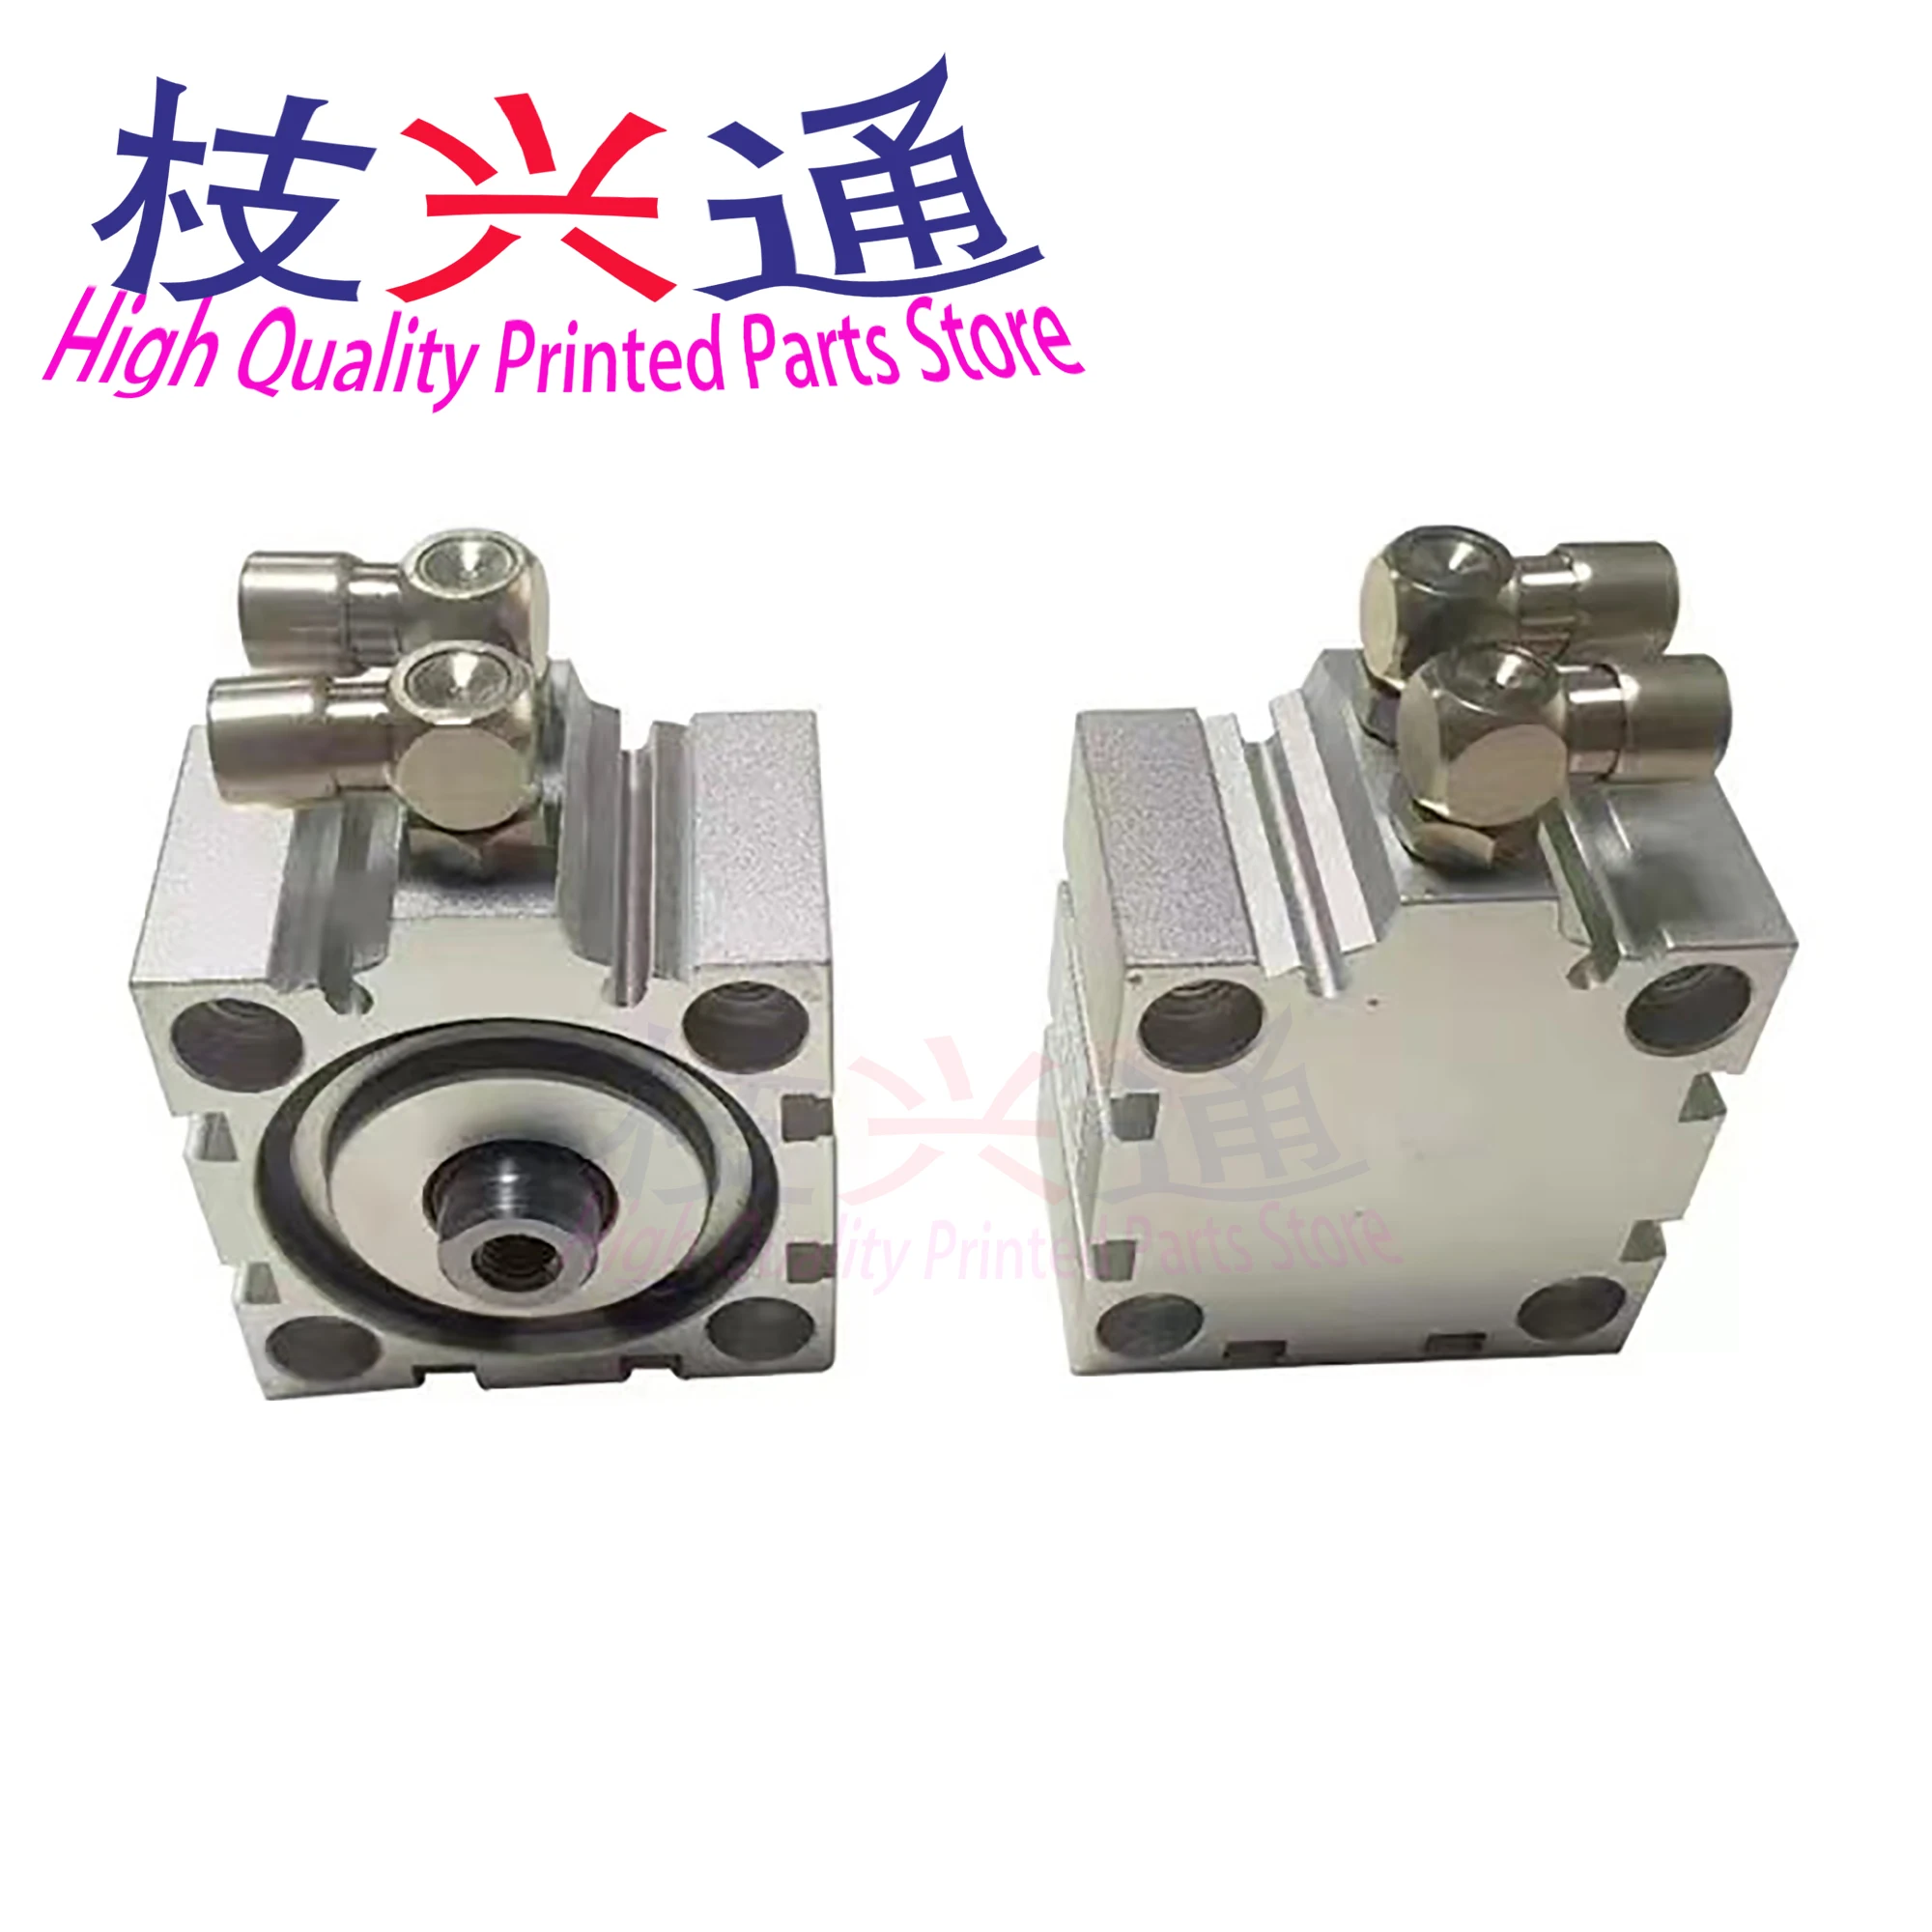 

F4.334.052 Pneumatic Cylinder For Heidelberg SM102 CD102 XL105 Printing Machine Spare Parts F4.334.052 Air Cylinder